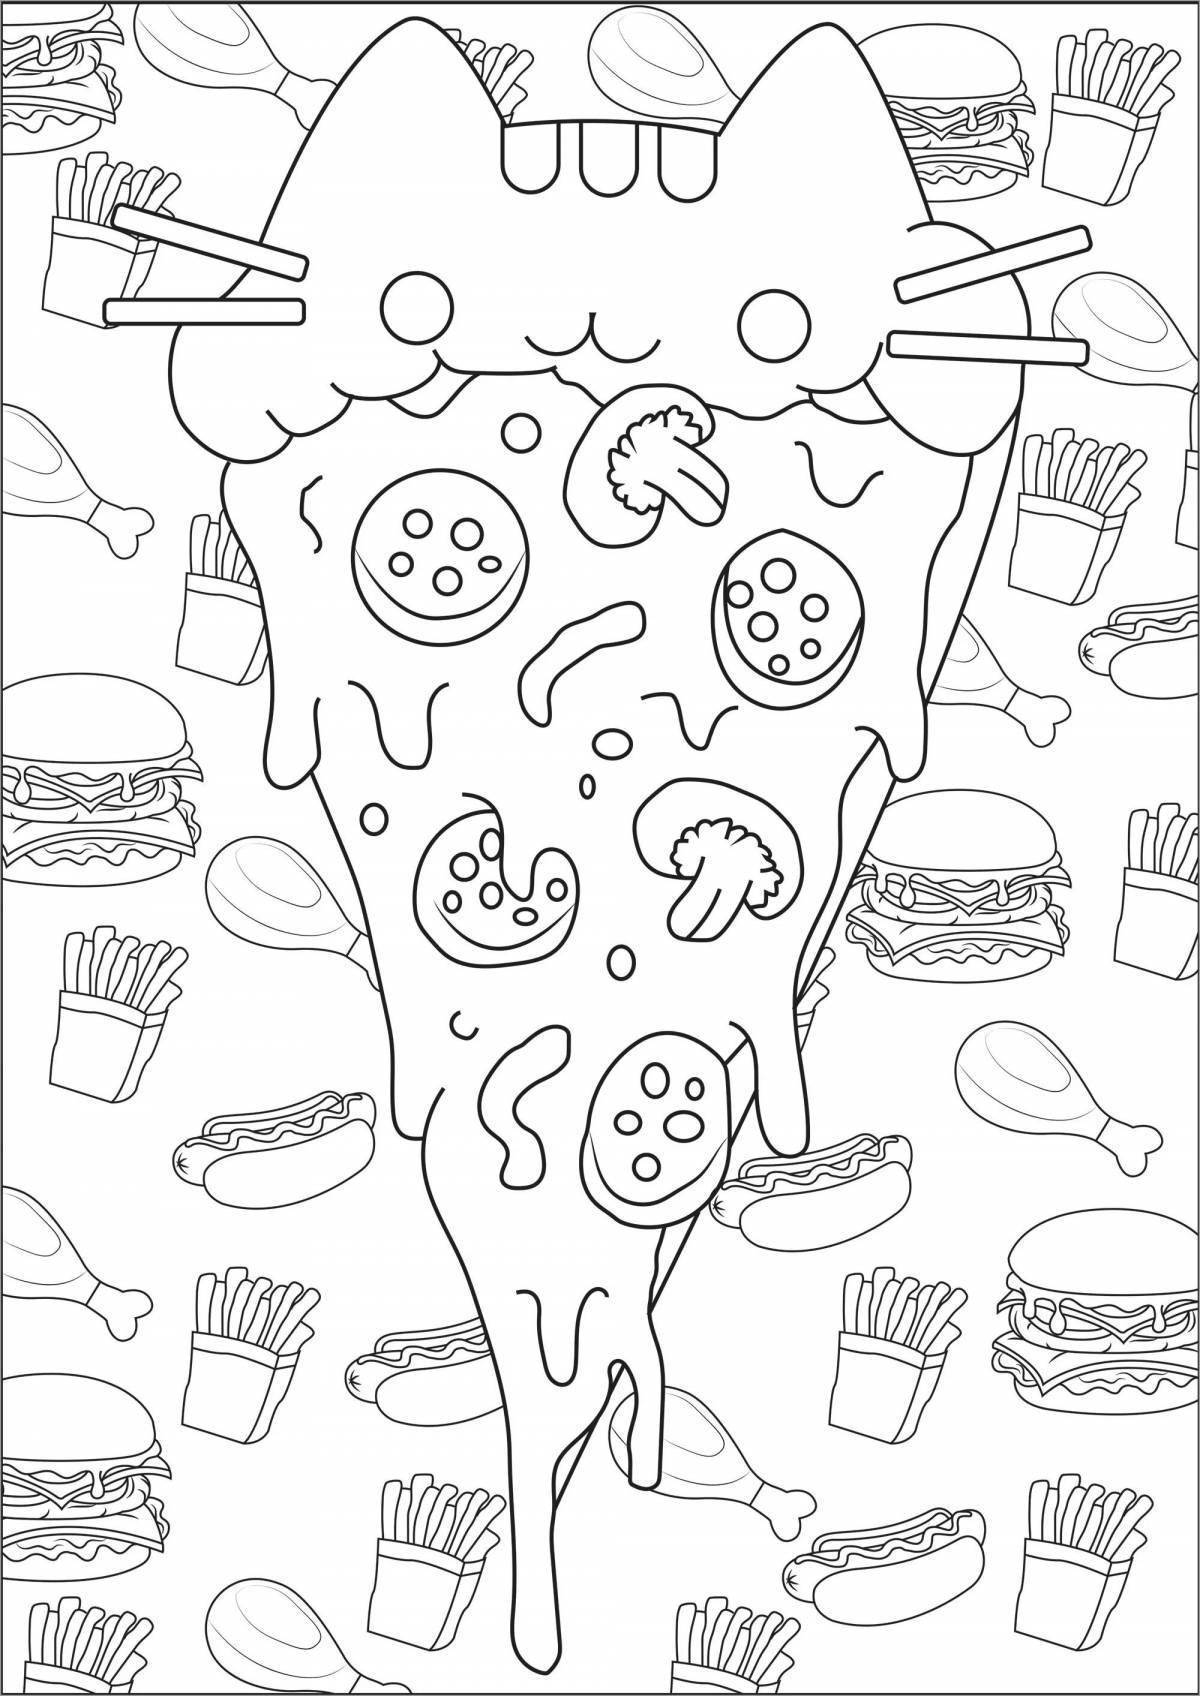 Exciting burger cat coloring page